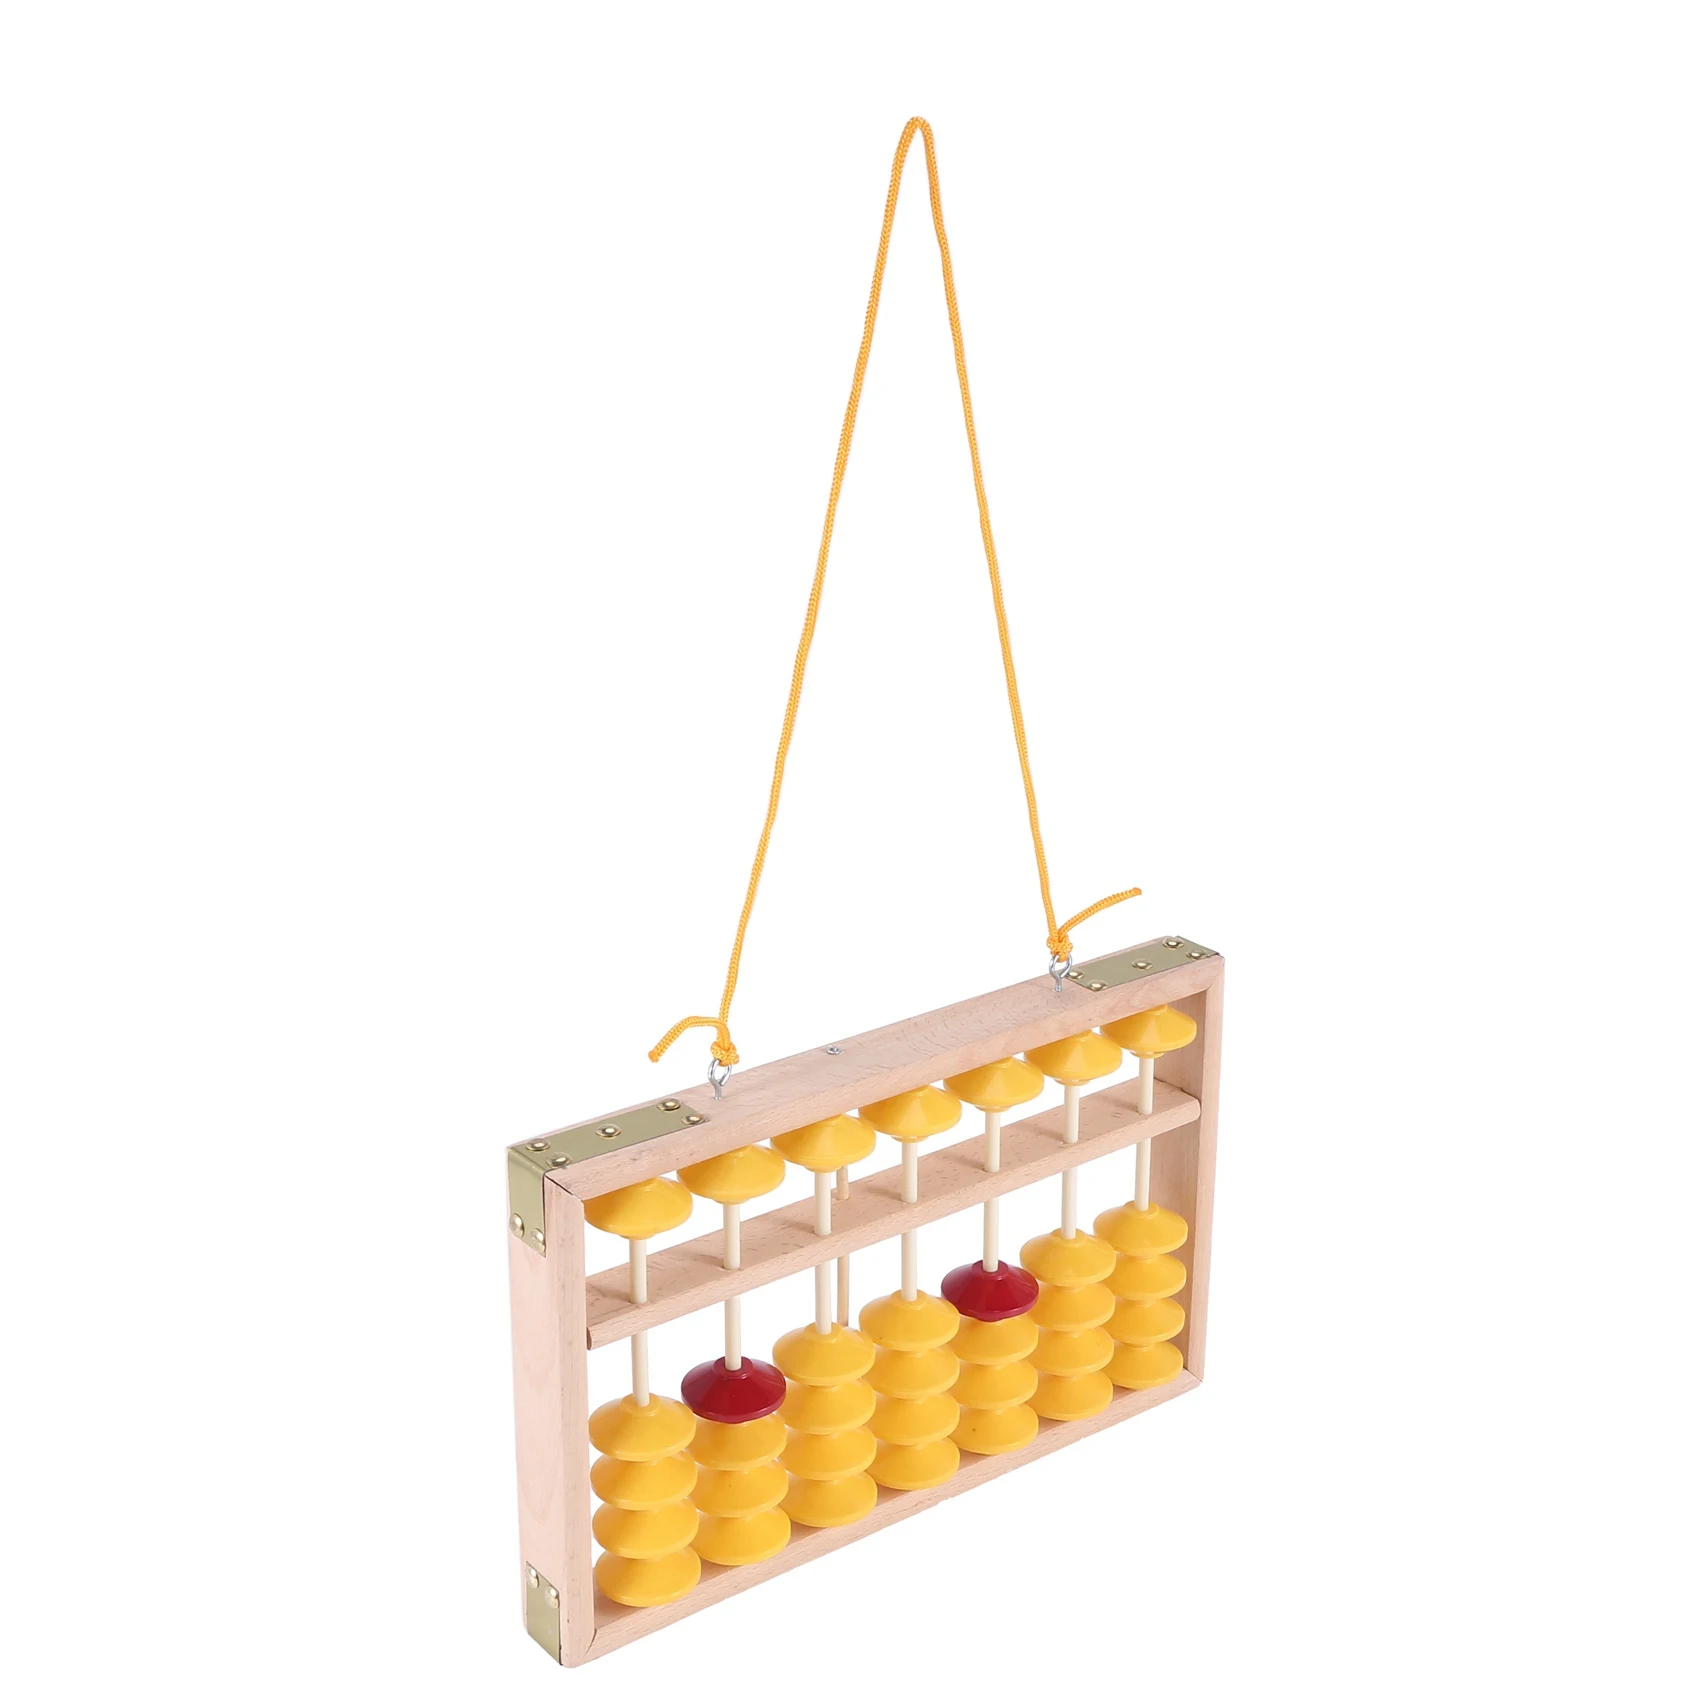 

7 Column Non-Slip Hanging Wooden Abacus Chinese Soroban Educational Tool Mathmetic Calculator for Student Teacher